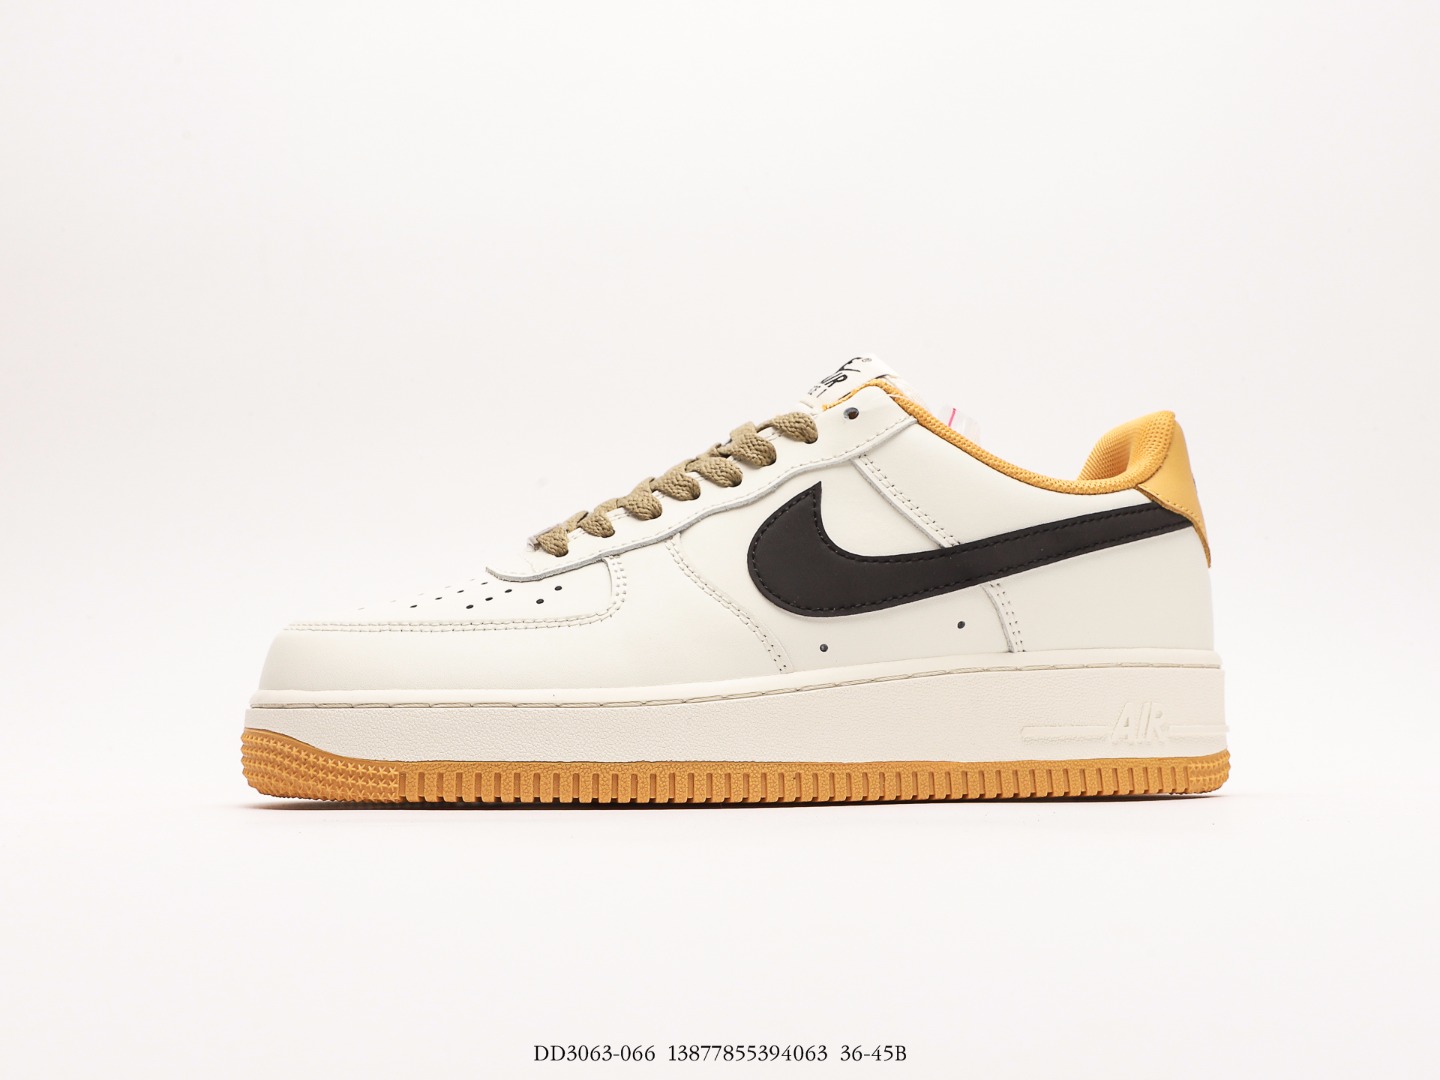 Nike By You Air Force 1'07 Low Retro SP_DD3063-066